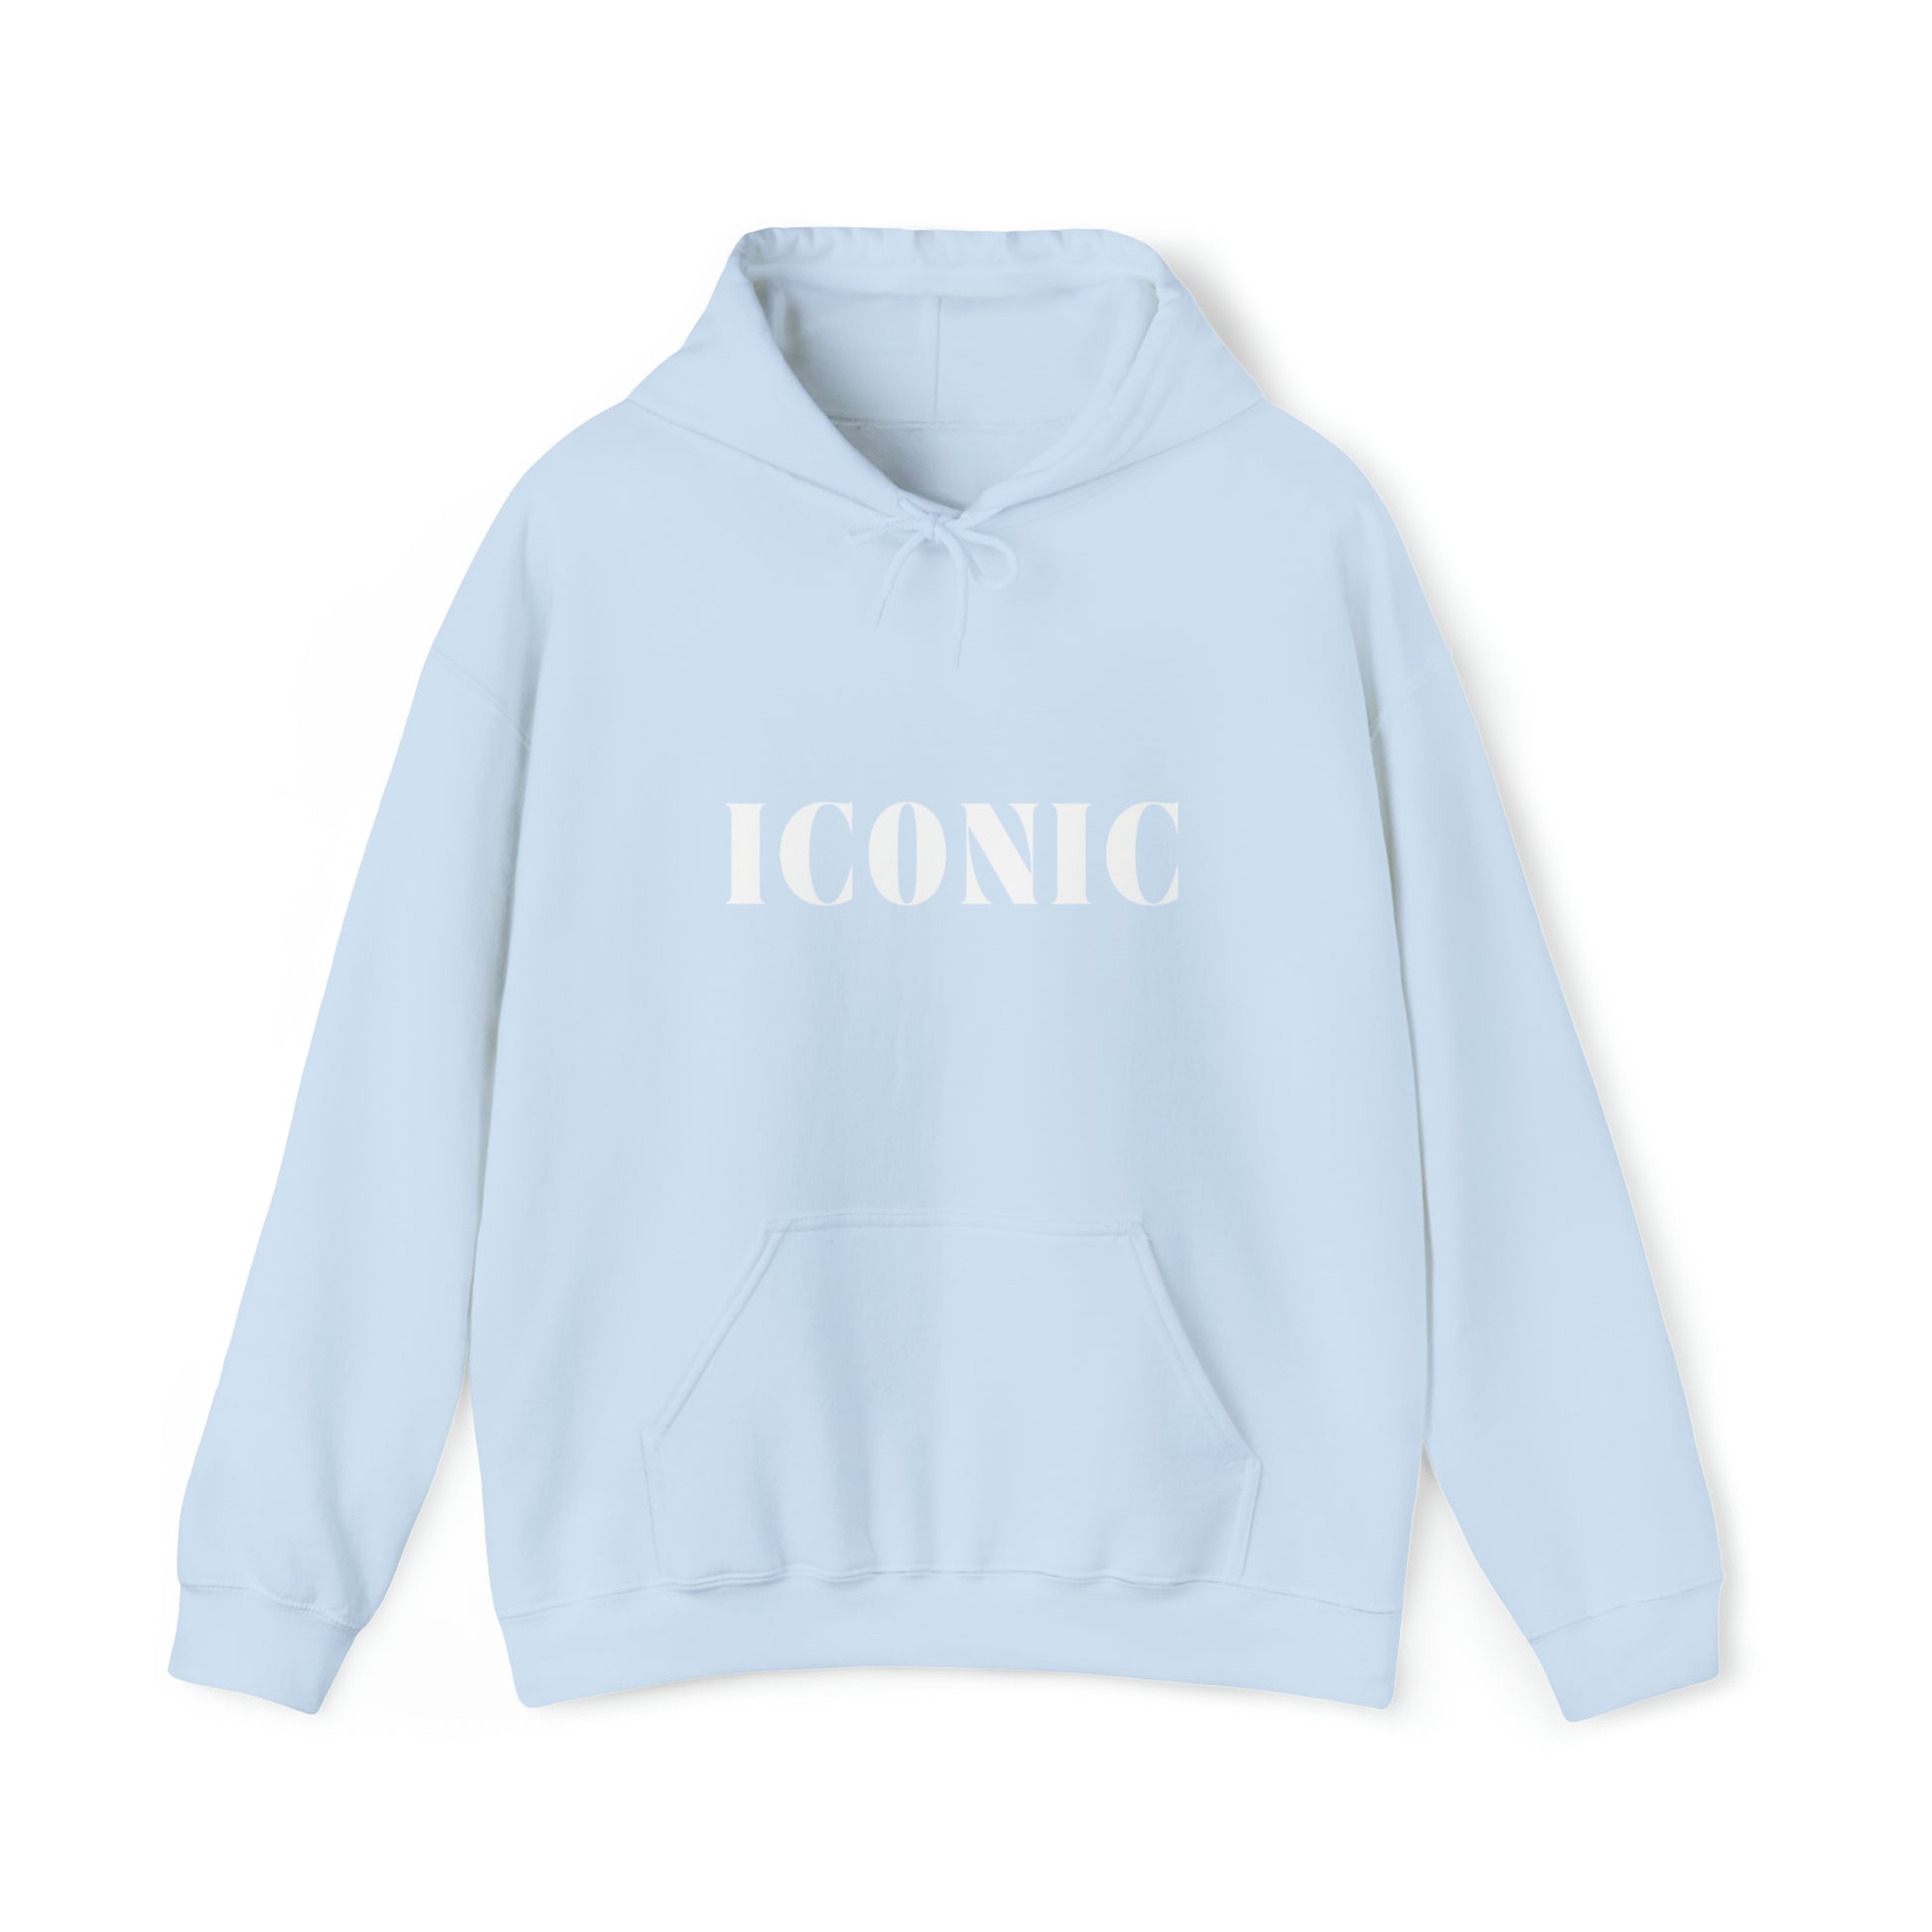 S Light Blue Iconic Hoodie from HoodySZN.com